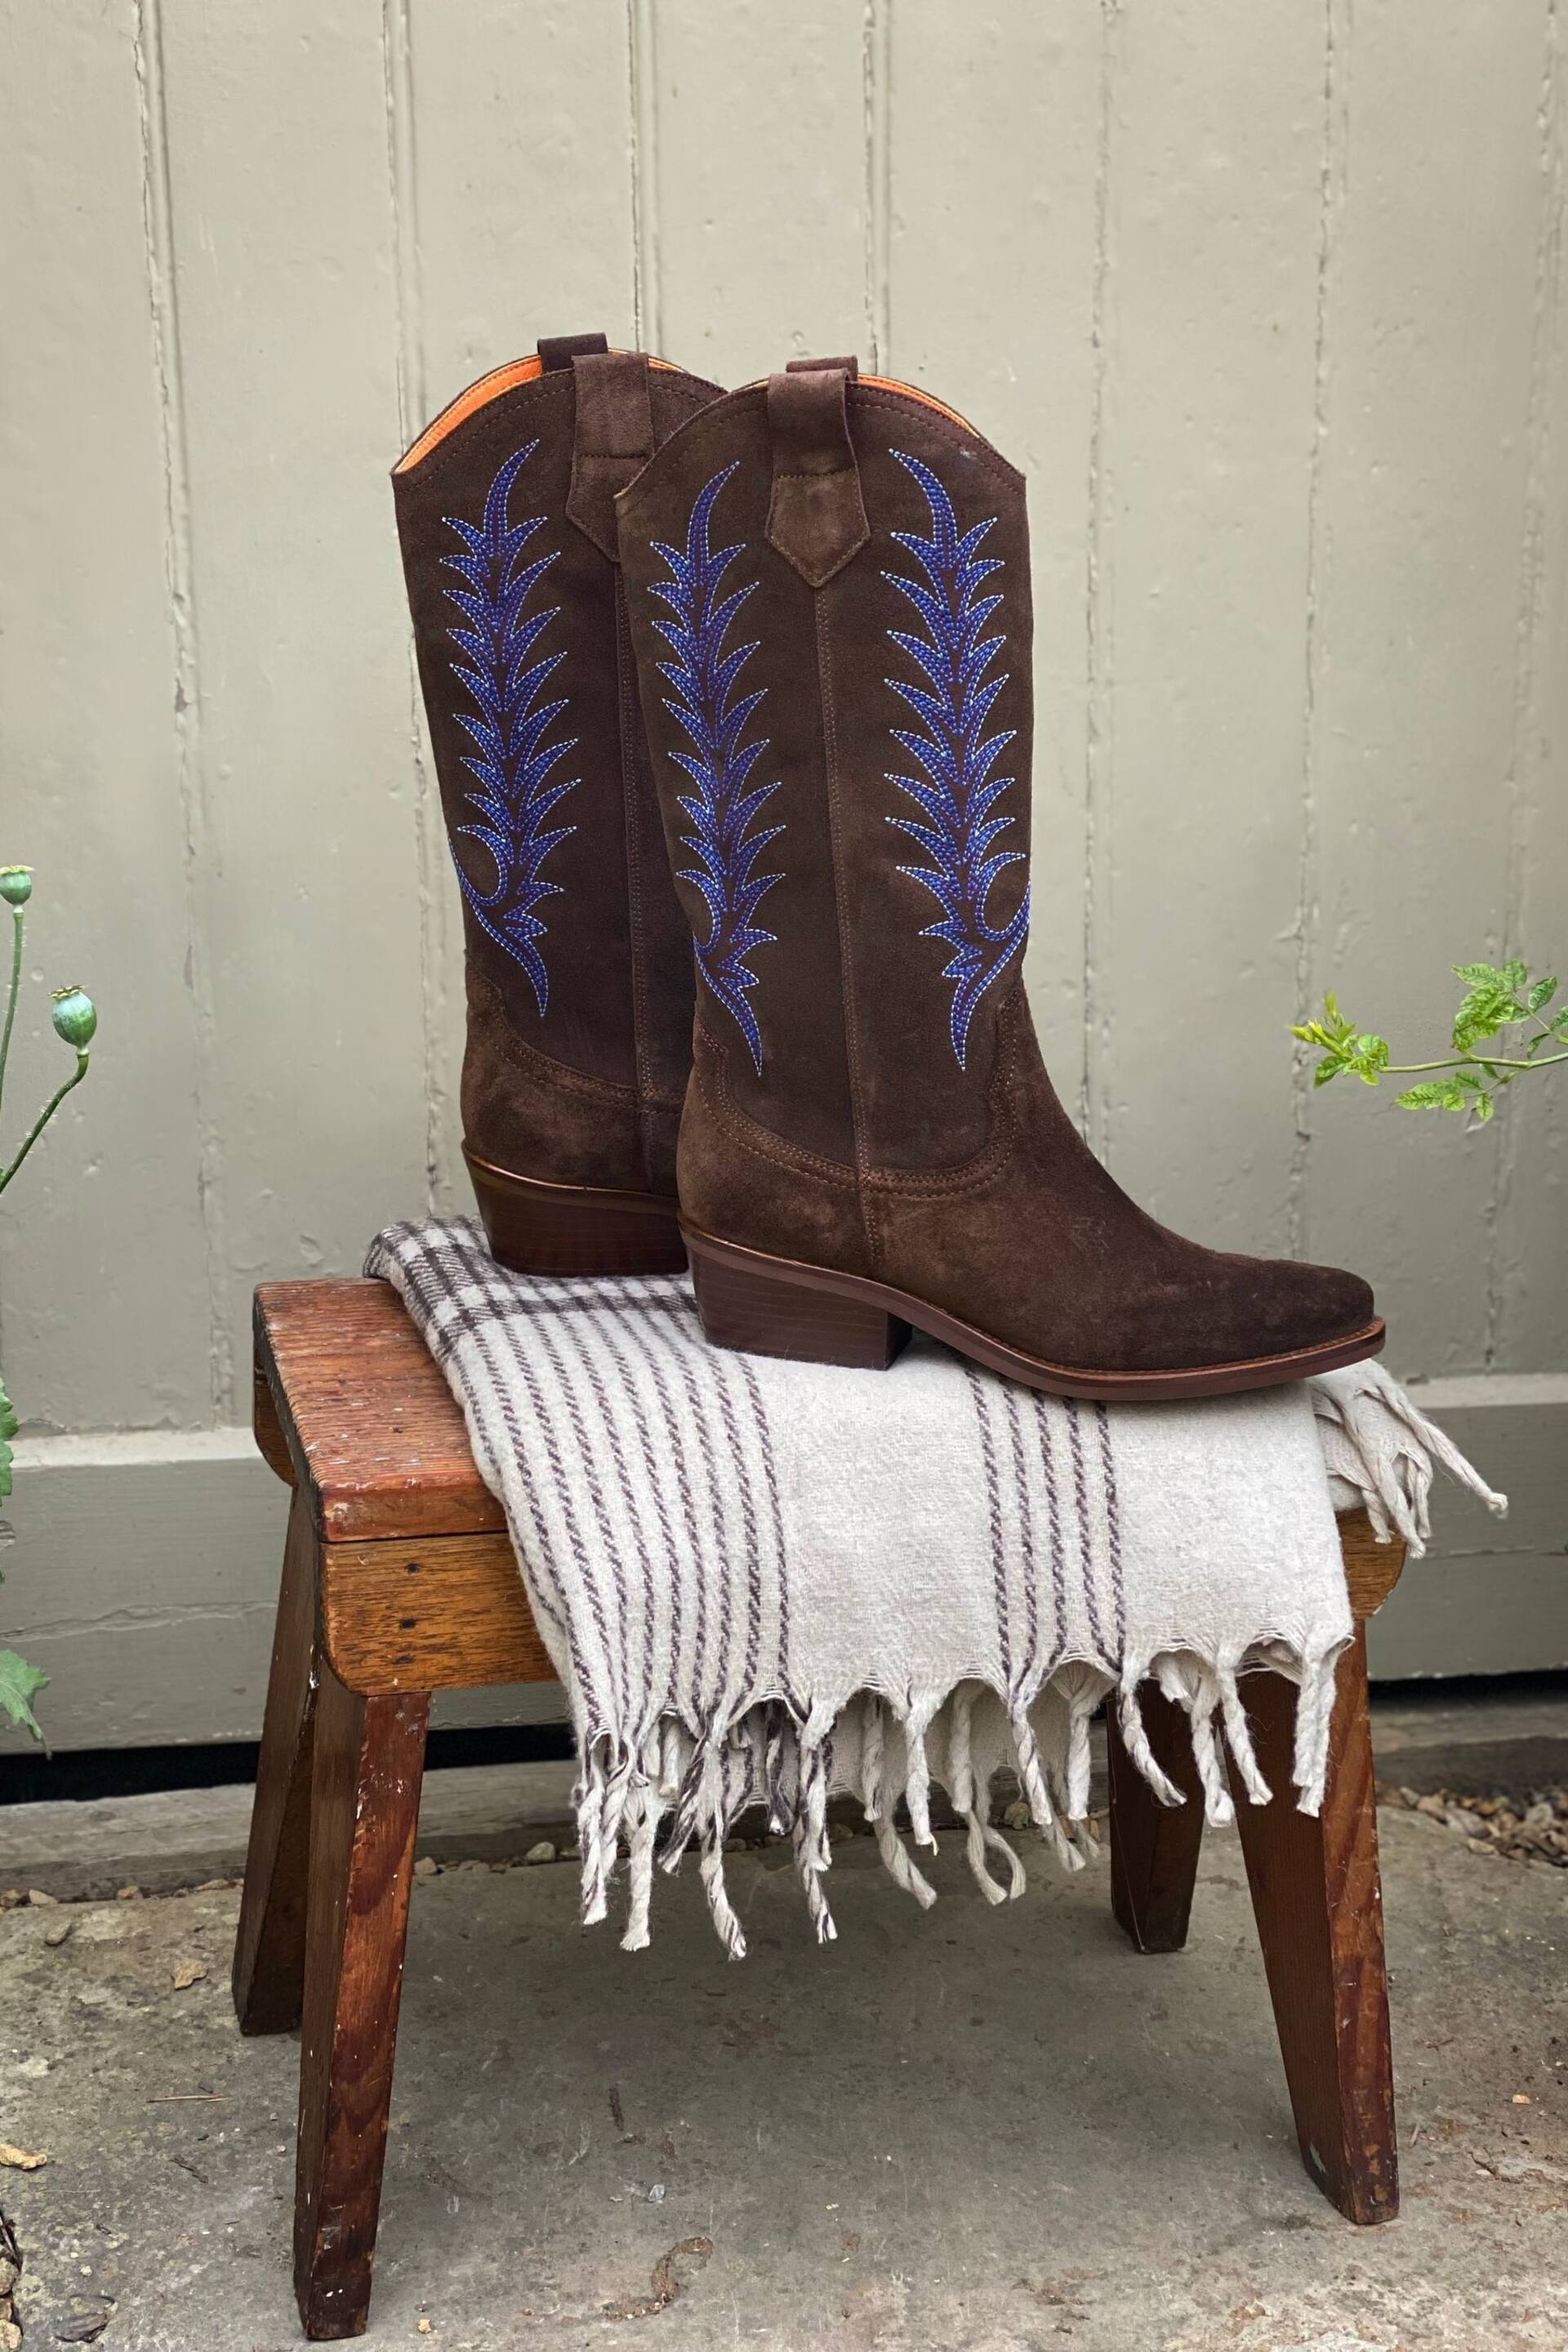 Penelope Chilvers Goldie Embroidered Cowboy Brown Boots - Image 6 of 7